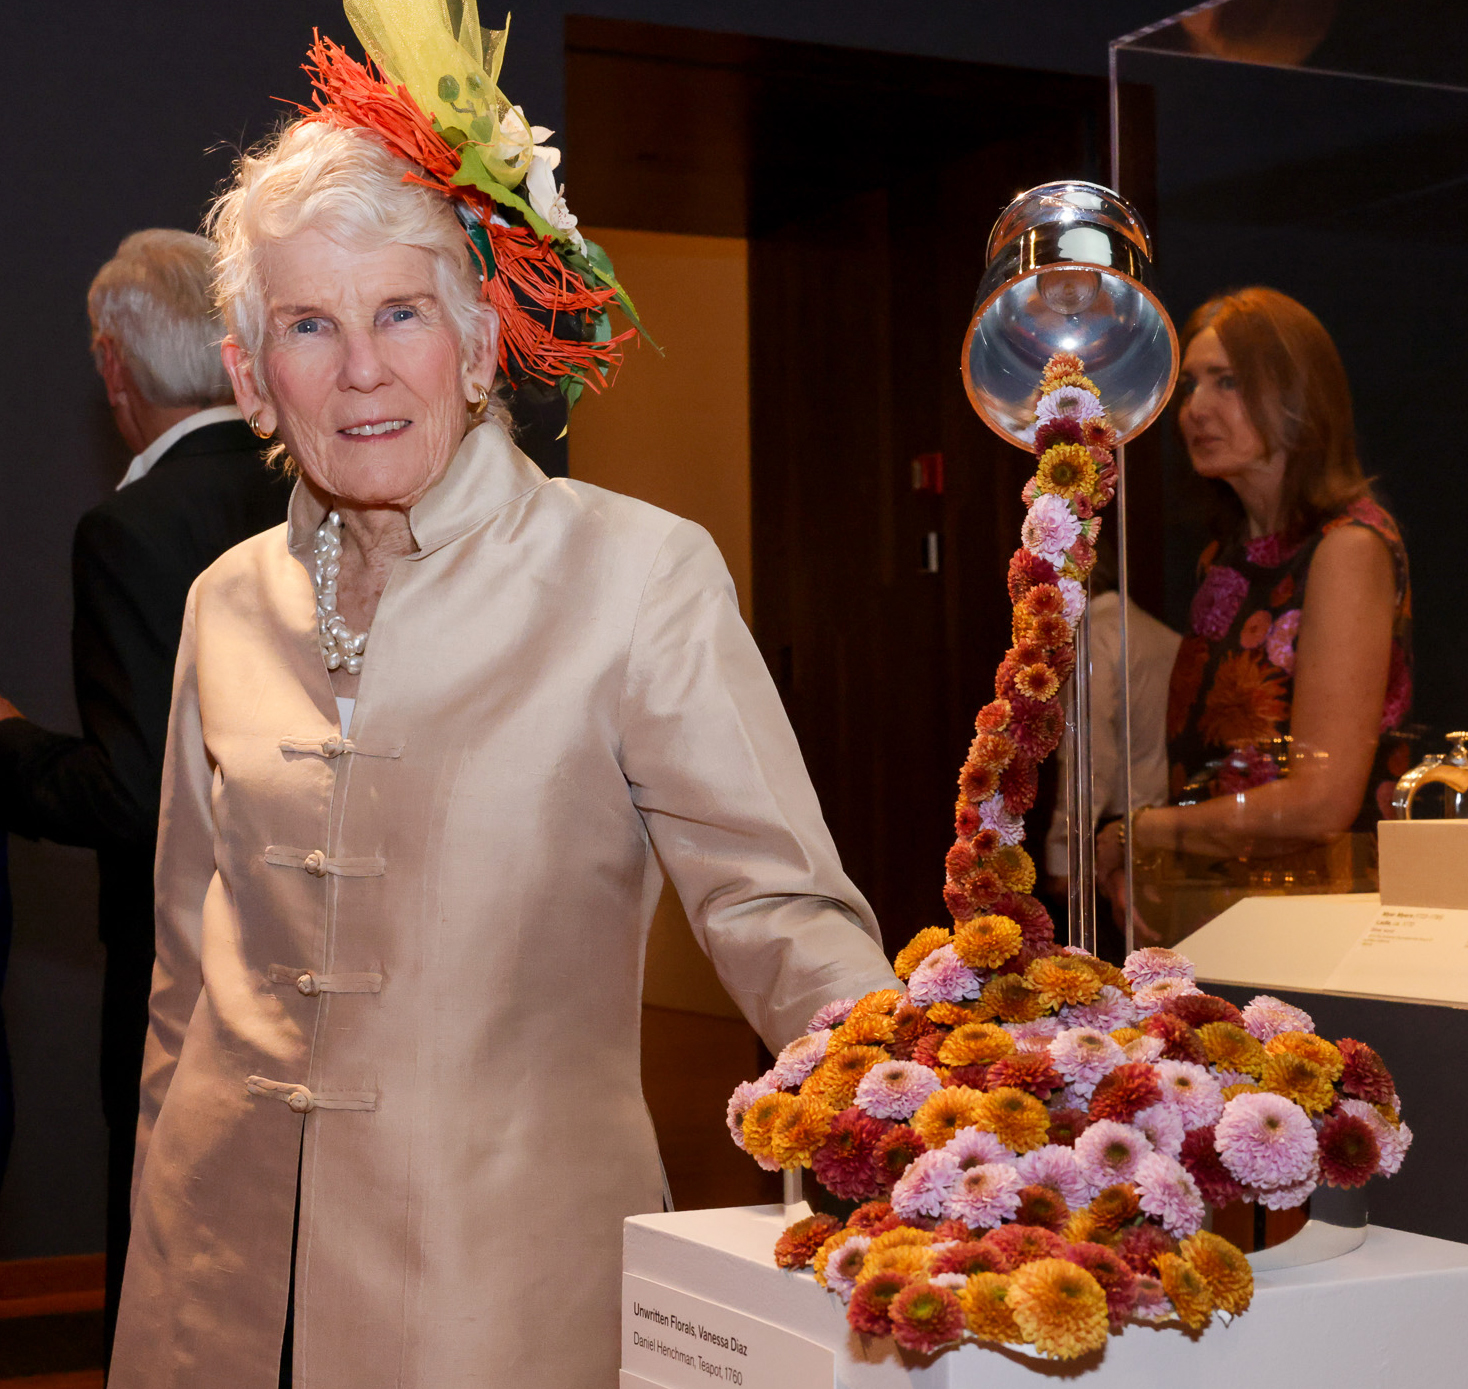 An elderly woman with white hair and a vibrant, floral hat stands next to a decorative arrangement of multicolored flowers that appears to be cascading from a fixture.